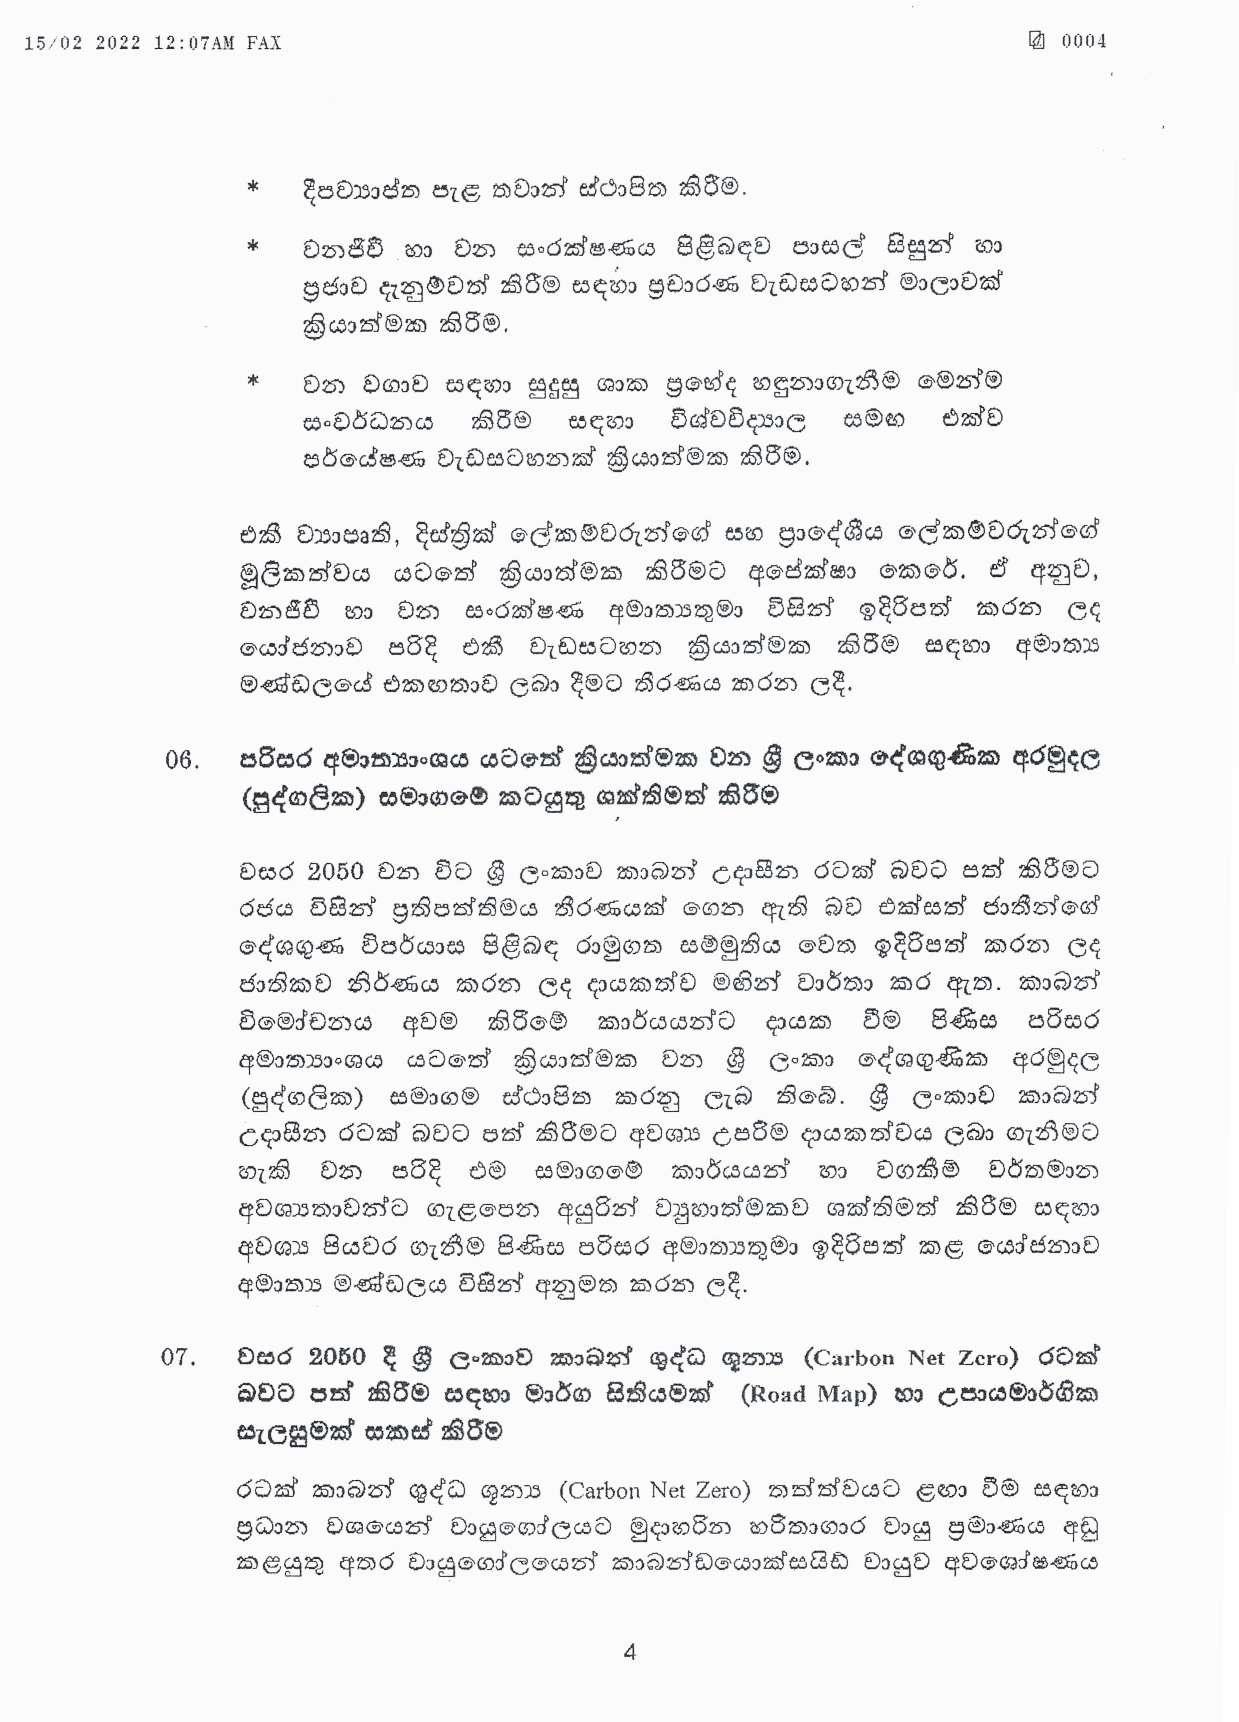 Cabinet Decision on 14.02.2022 page 004